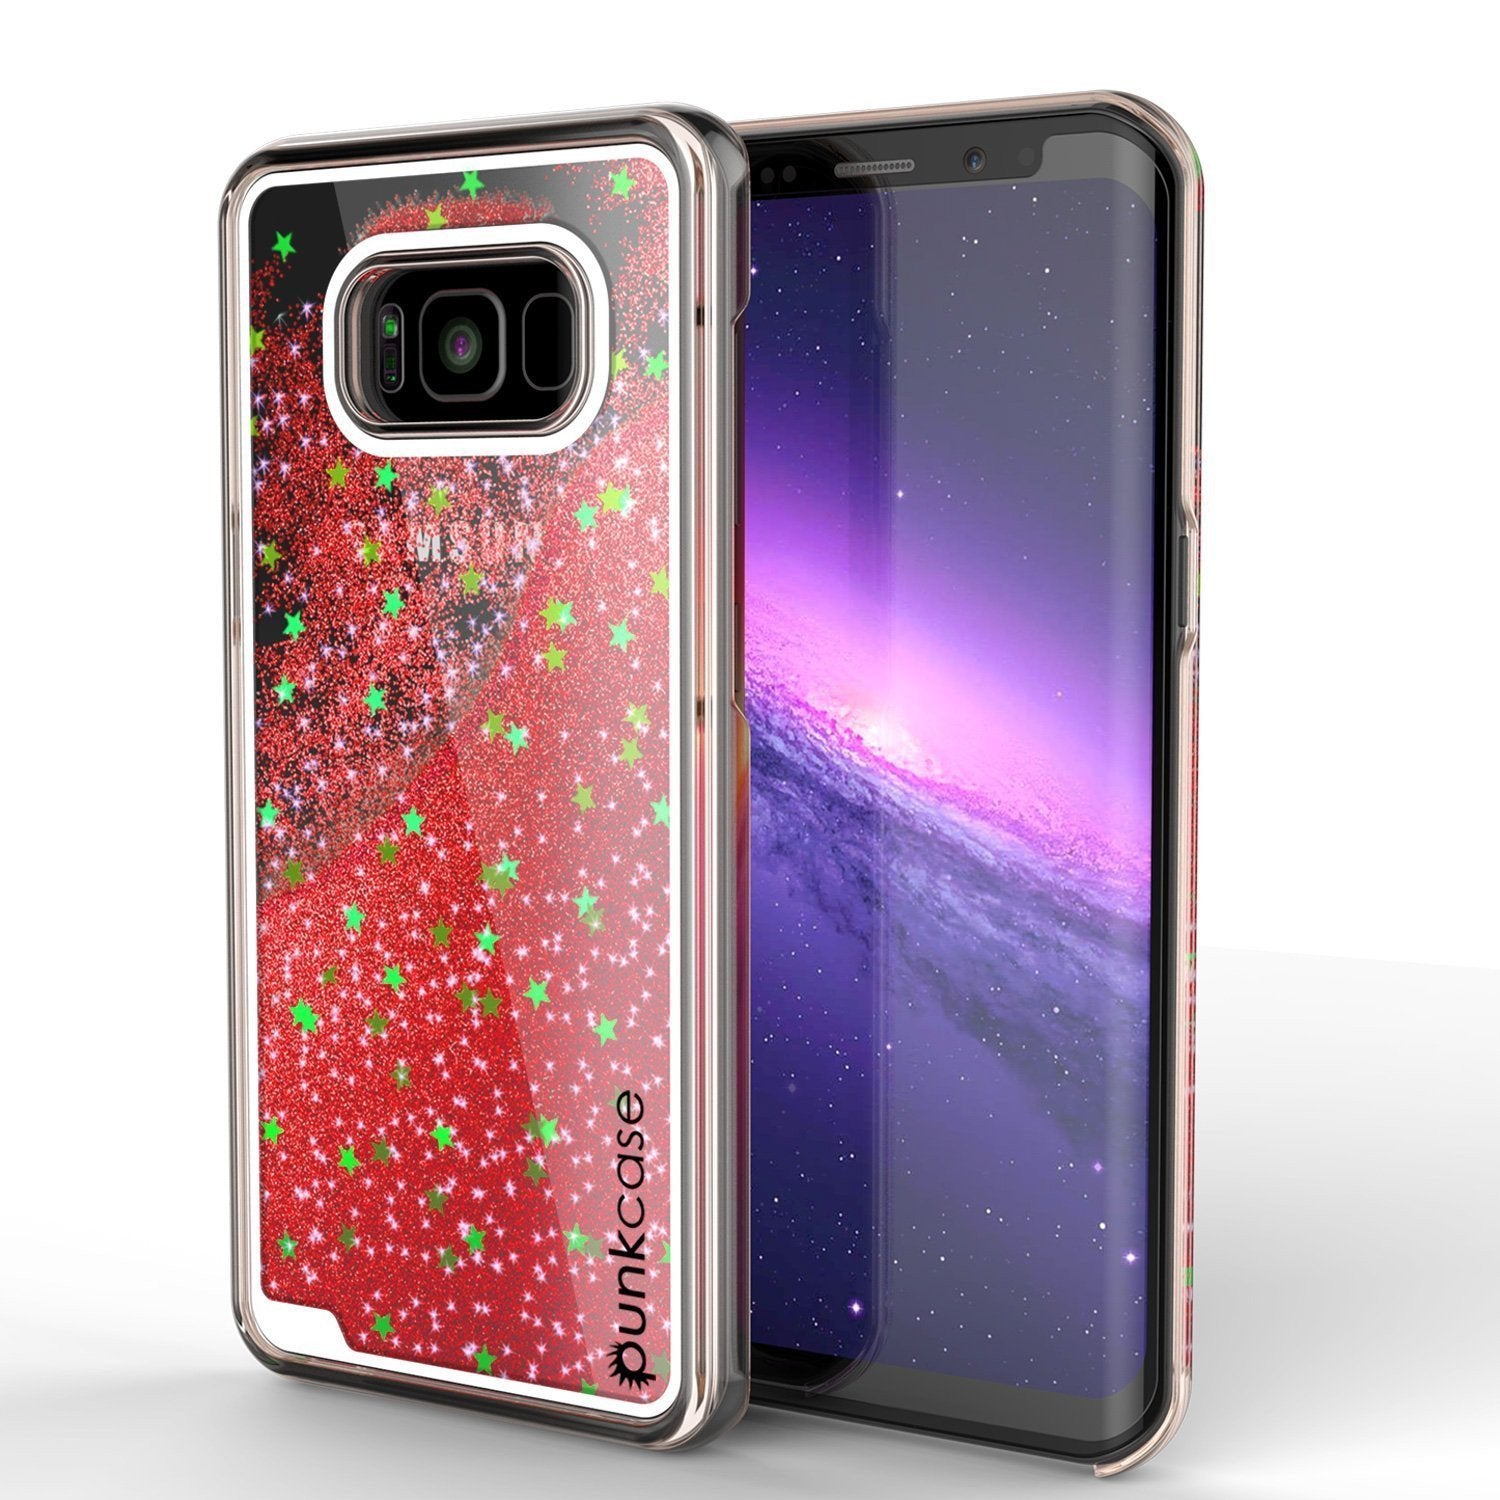 S8 Plus Case, Punkcase [Liquid Series] Protective Dual Layer Floating Glitter Cover with lots of Bling & Sparkle + PunkShield Screen Protector for Samsungs Galaxy S8+ [Red]